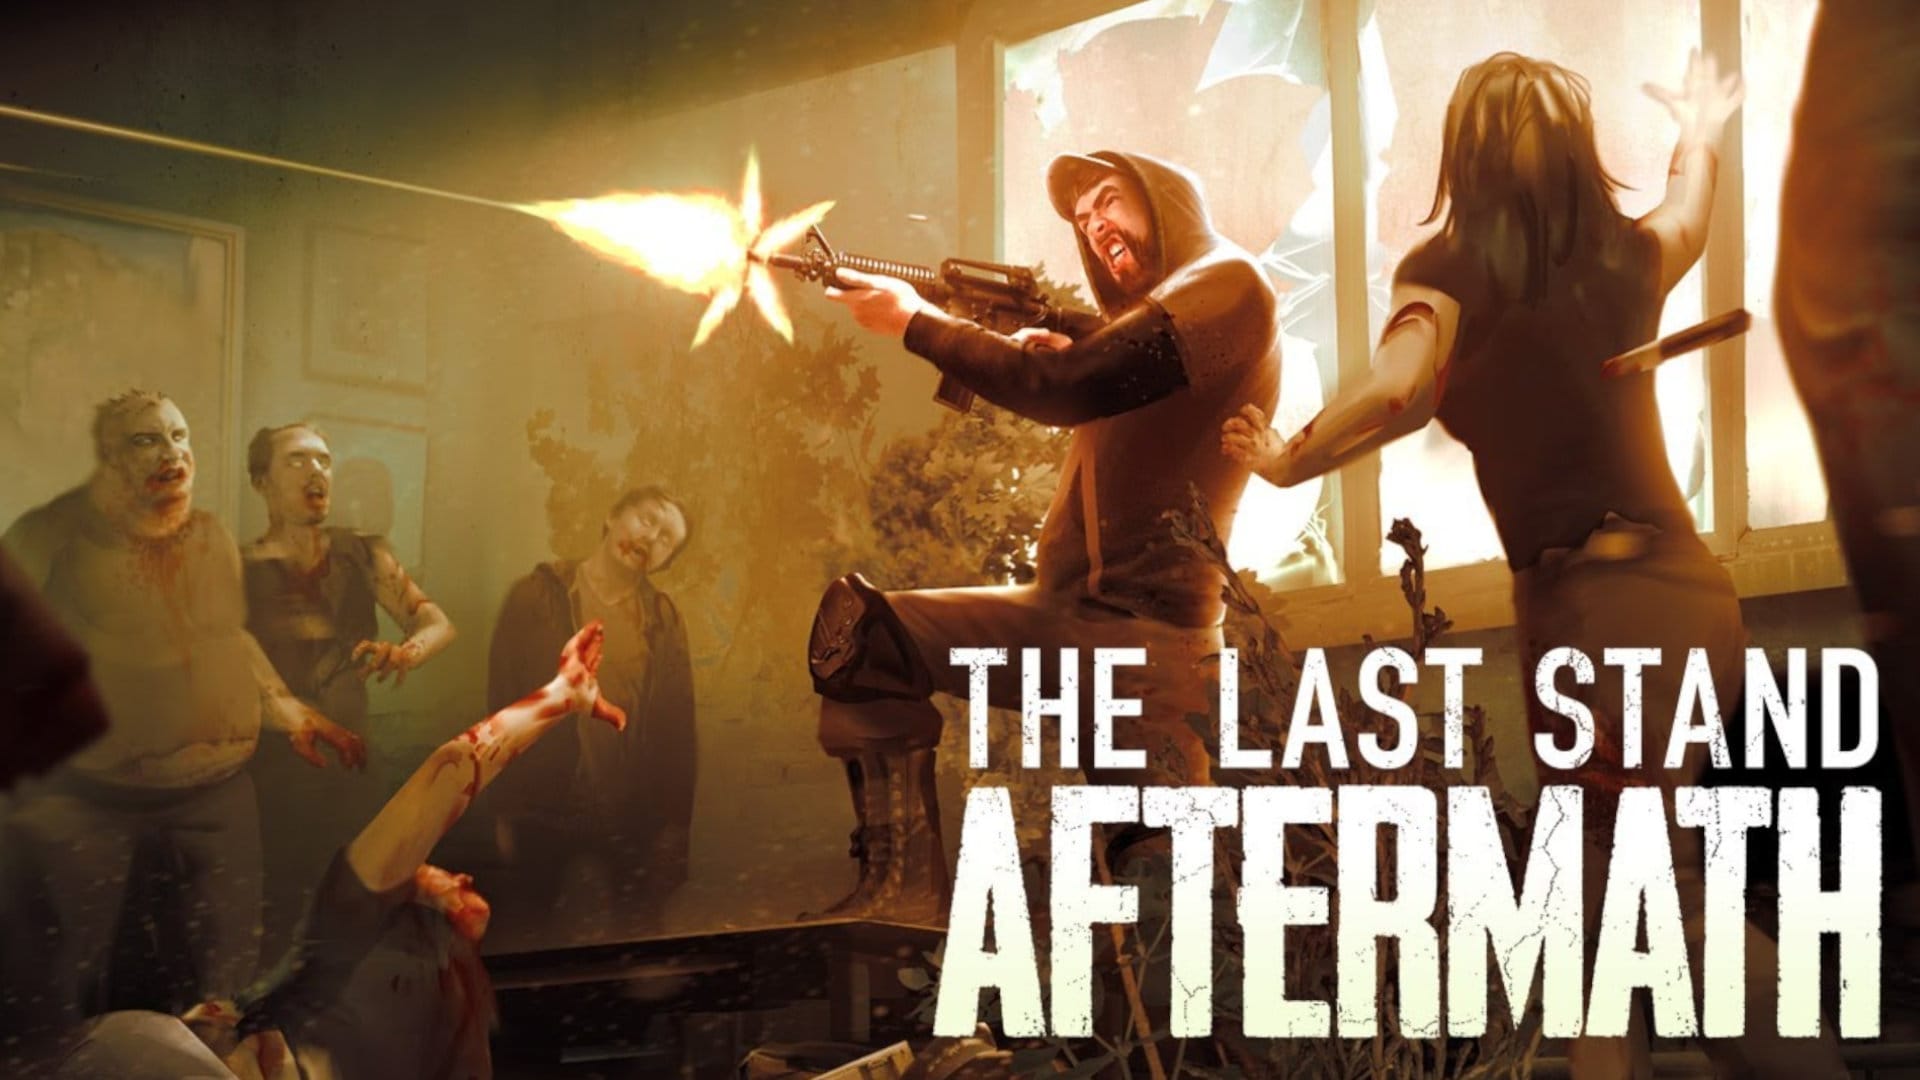 Traits last stands. The last Stand Aftermath игра. Игра the last Stand Armor games. Зомби апокалипсис 2022 года.